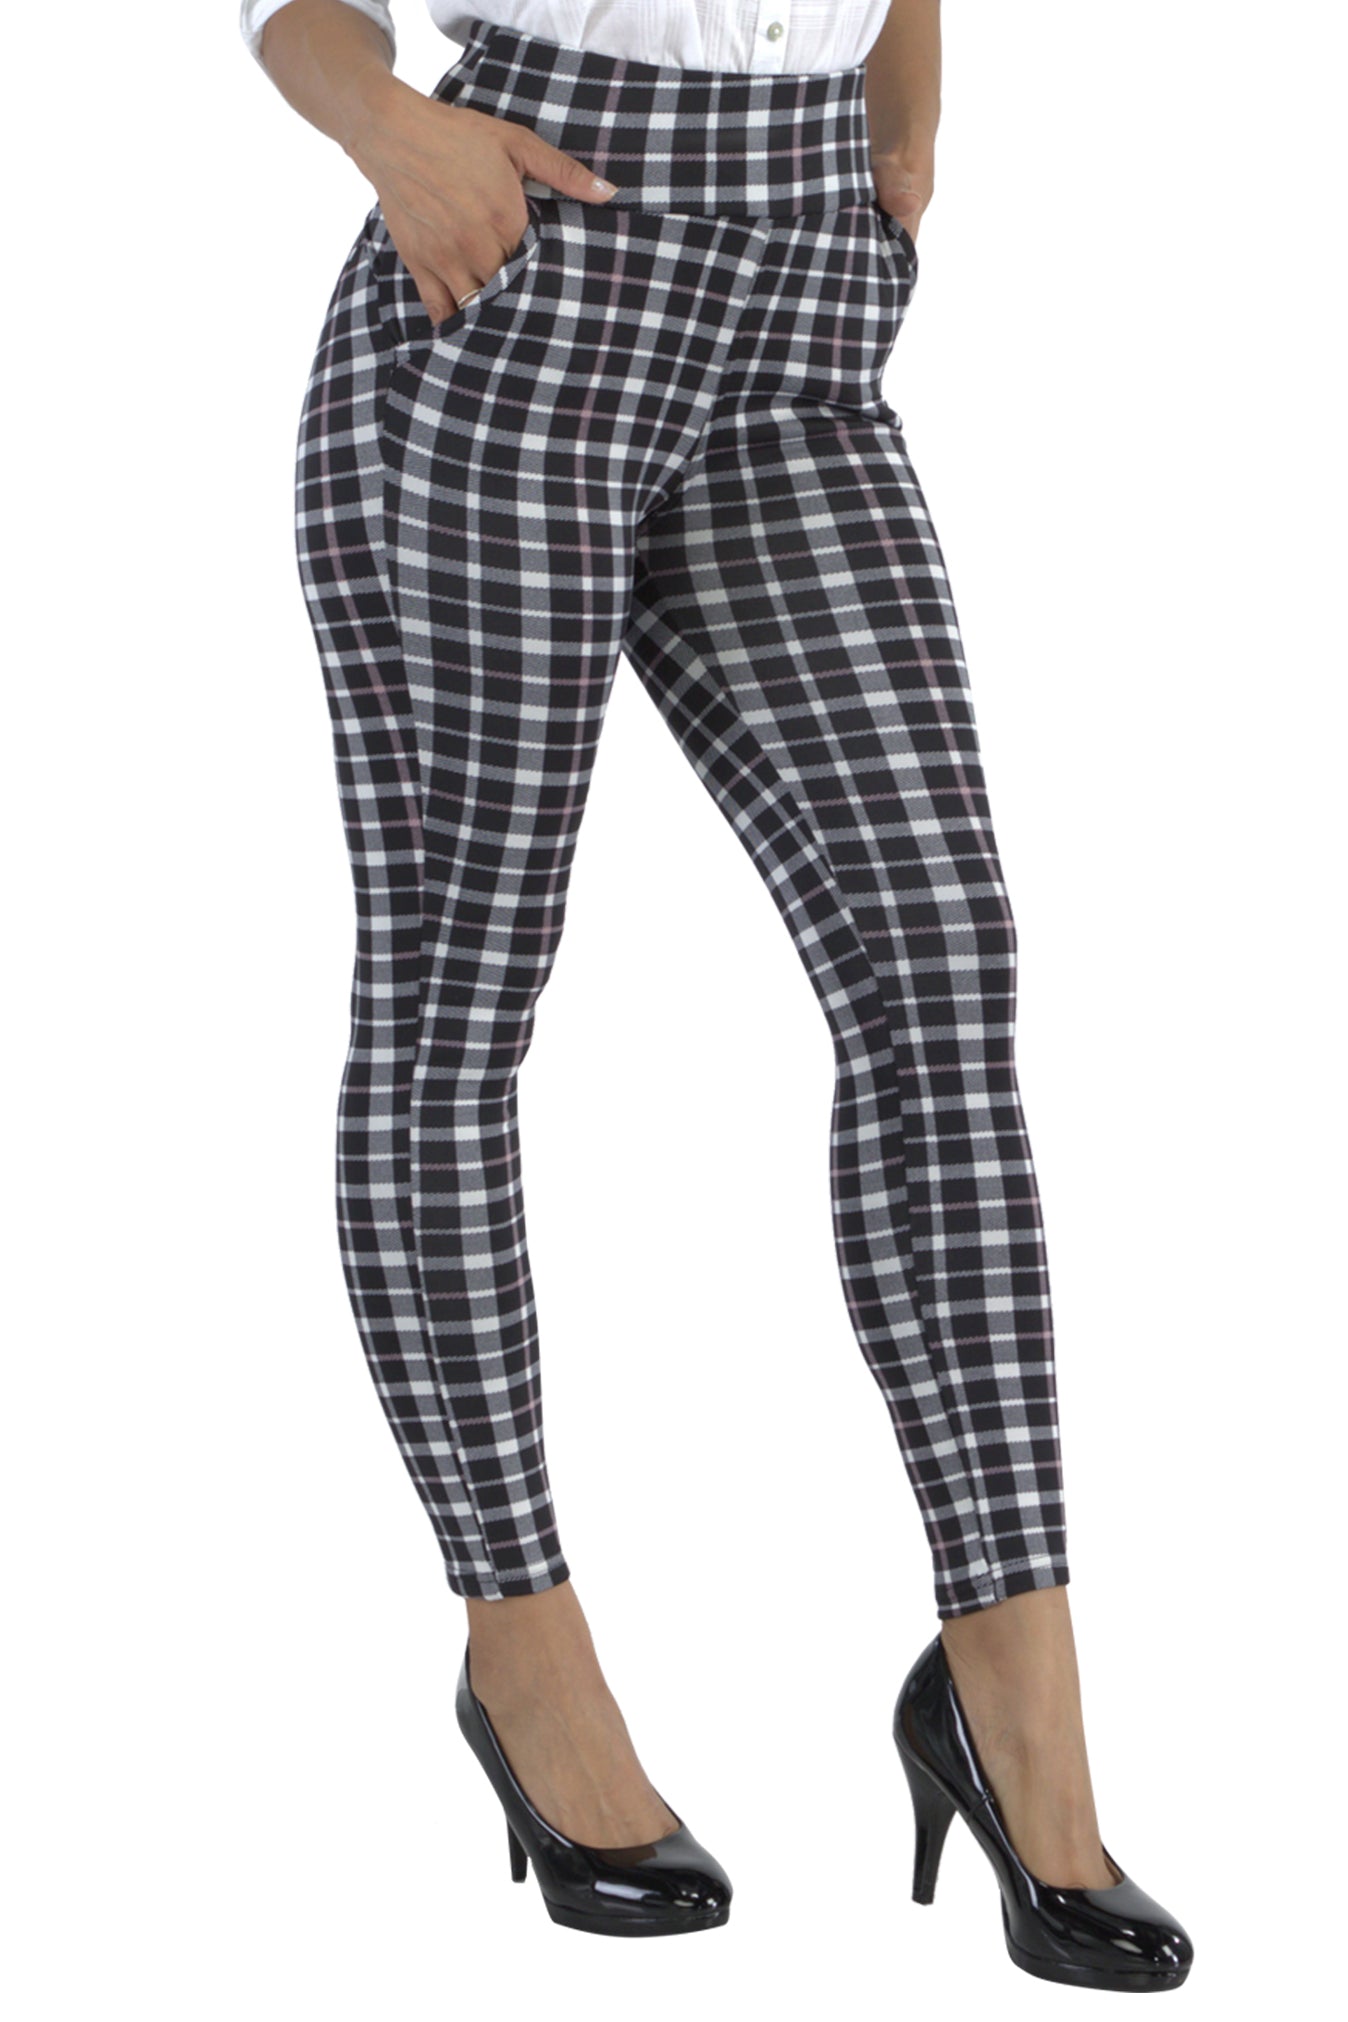 Wholesale Womens High Waist Sculpting Treggings With Front Pockets - Black, White, Muave Plaid